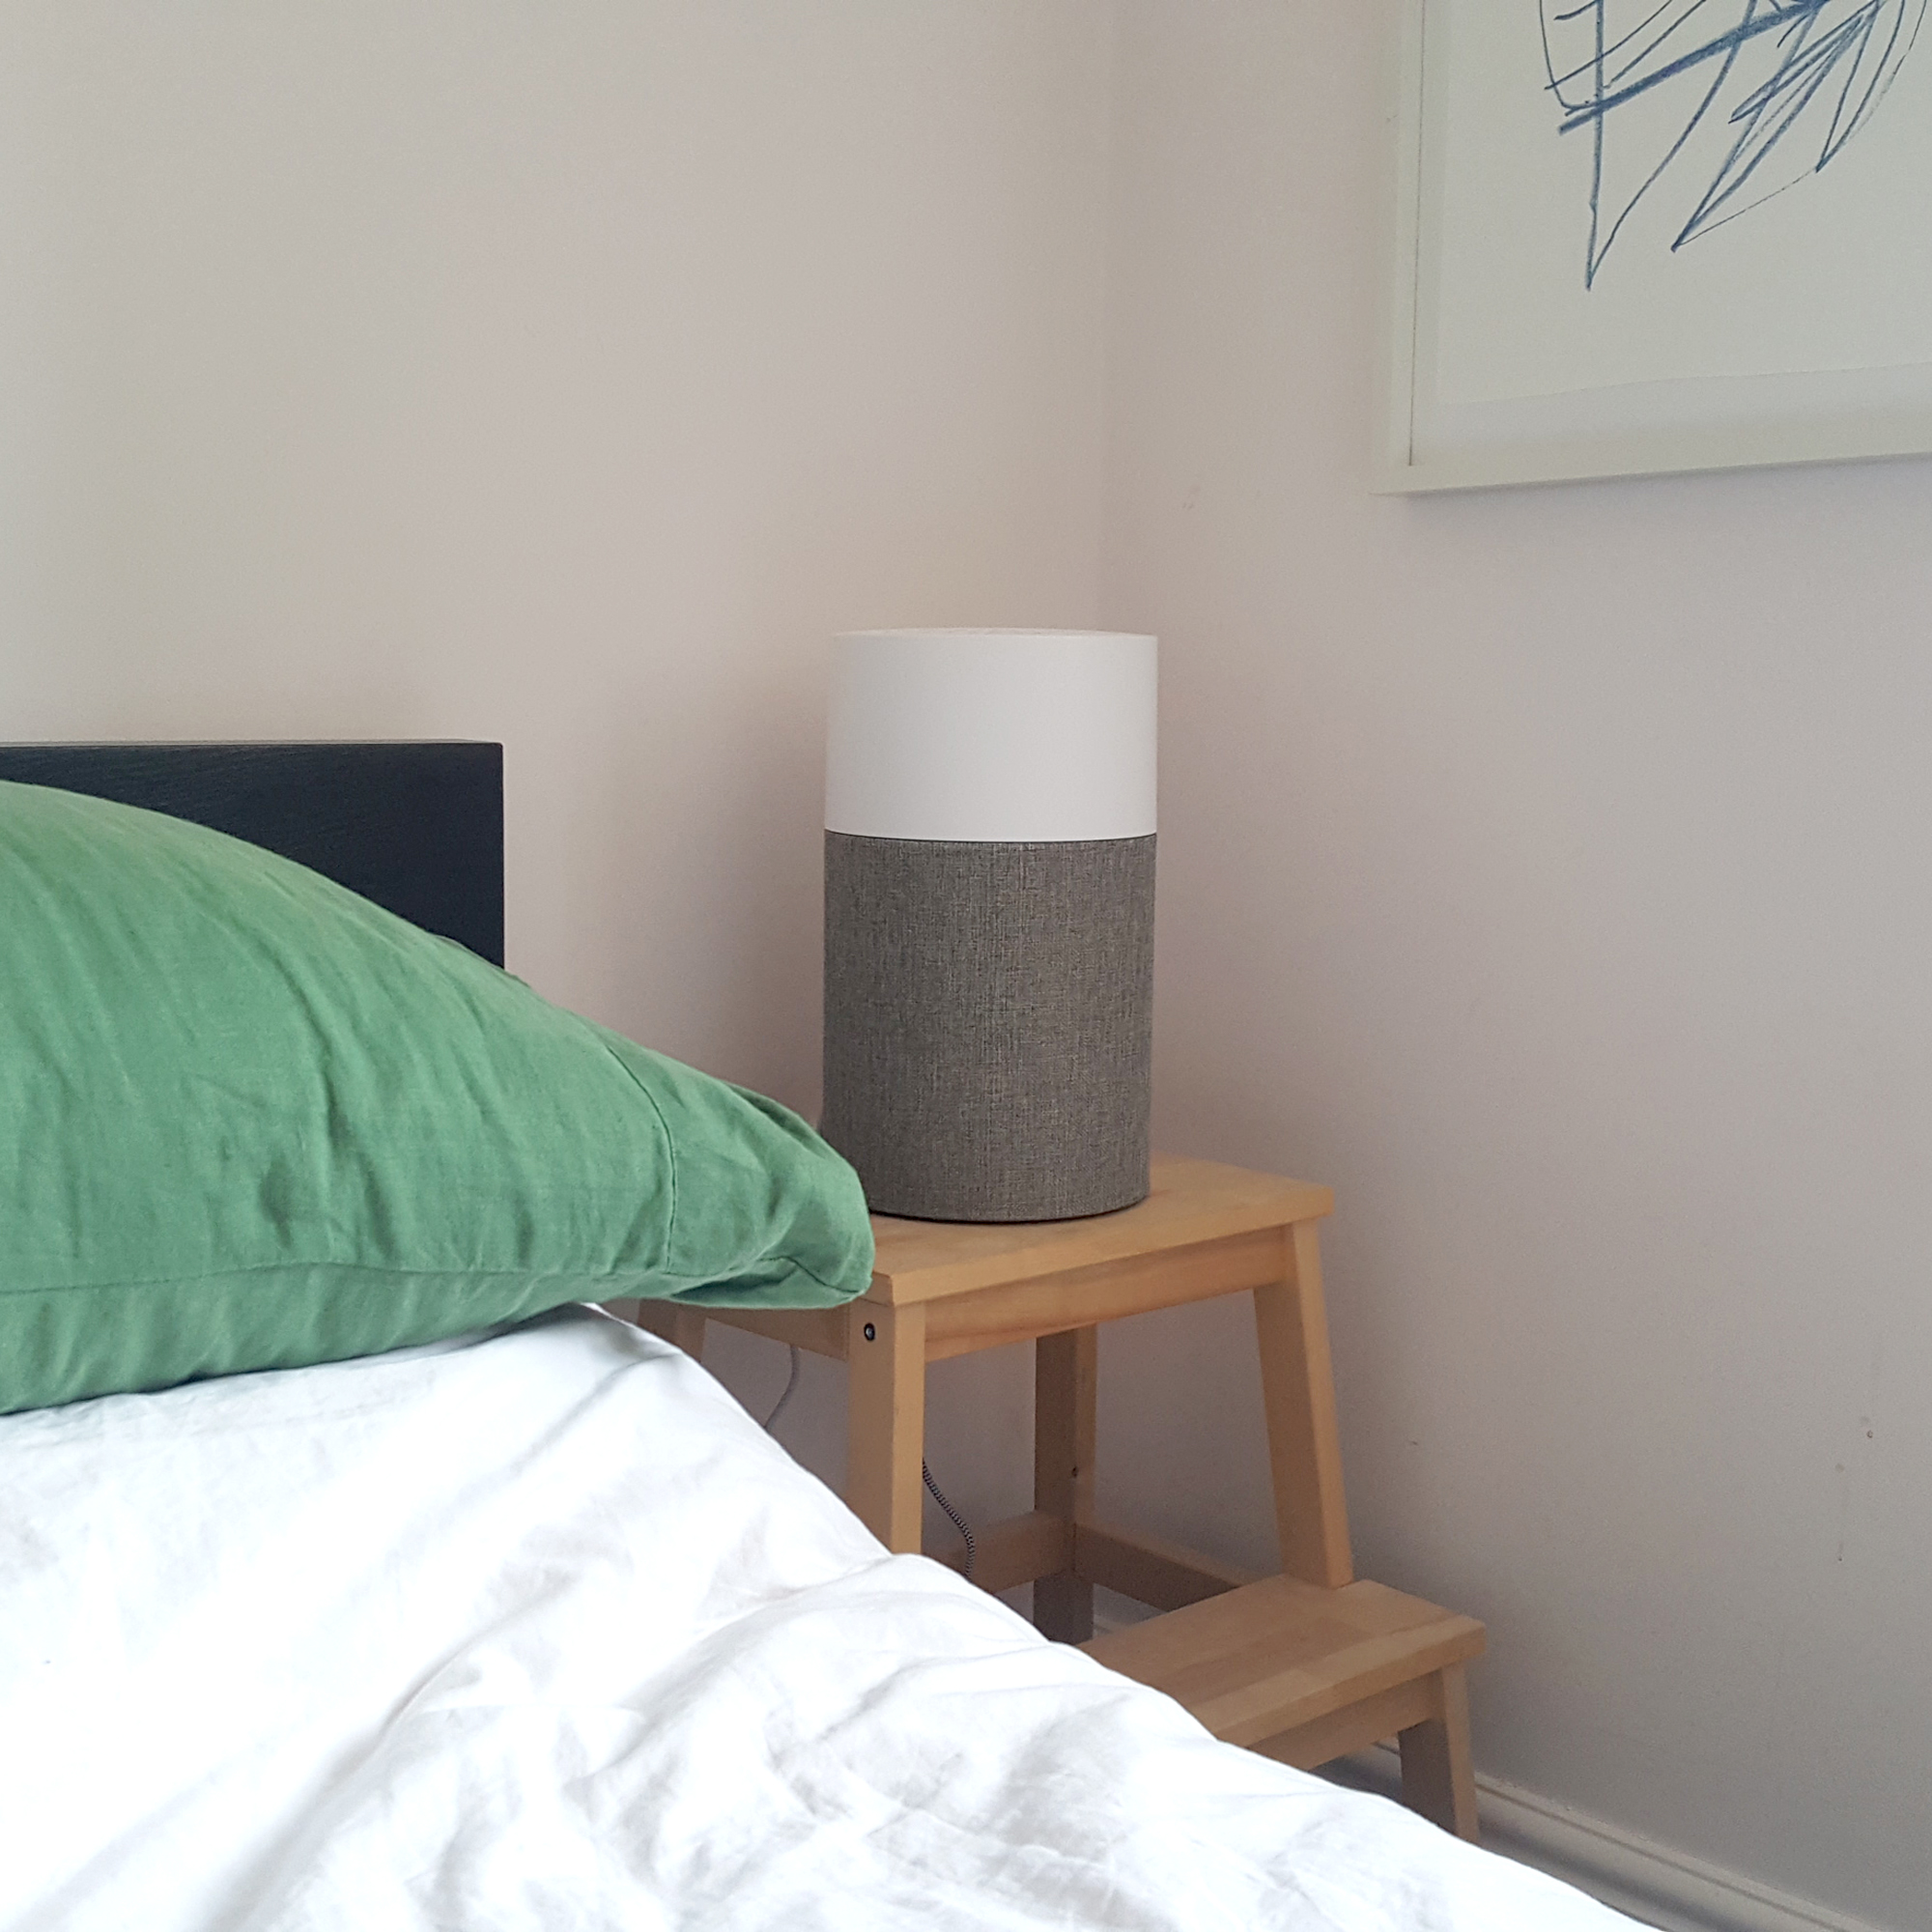 The Blueair Blue Pure 511 air purifier in a bedroom with green bedding